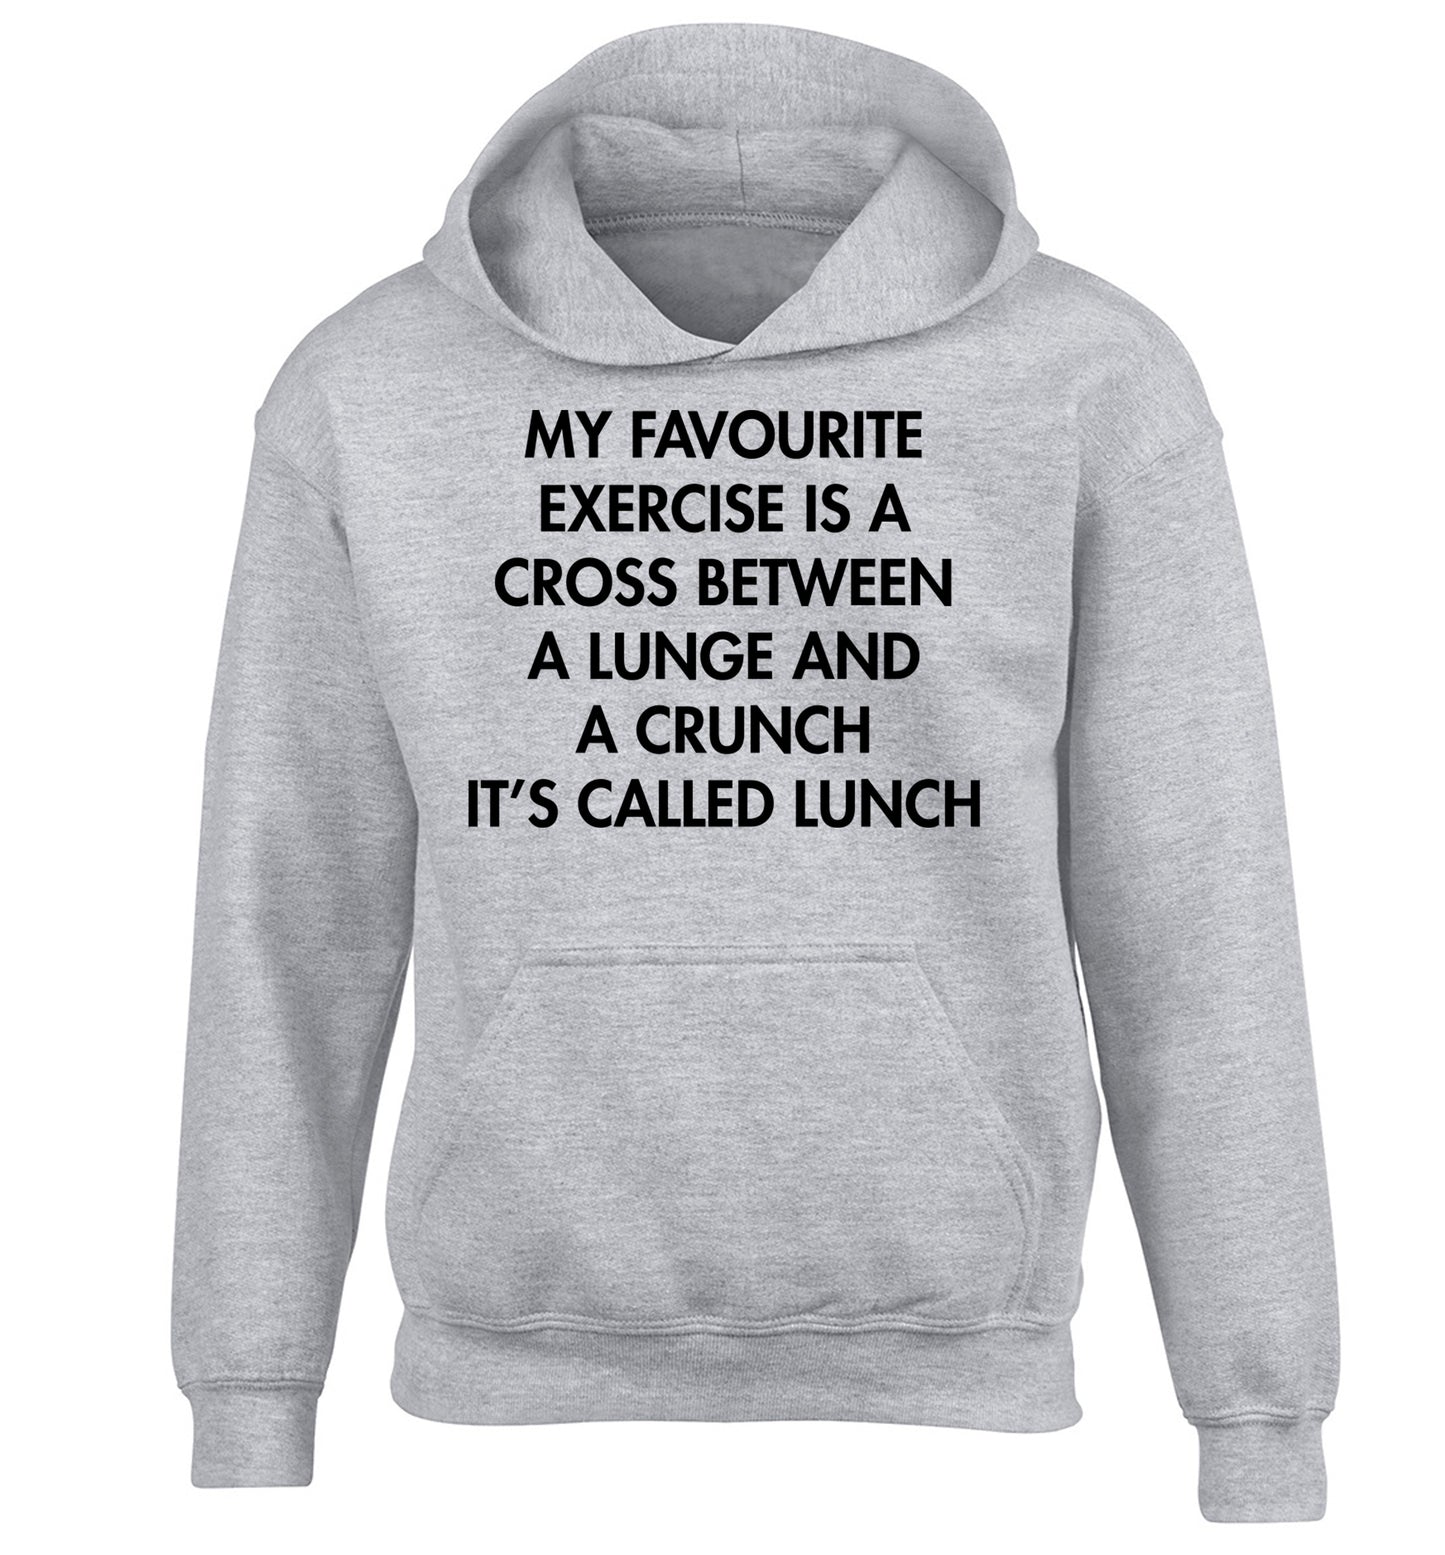 My favourite exercise is a cross between a lung and a crunch it's called lunch children's grey hoodie 12-14 Years